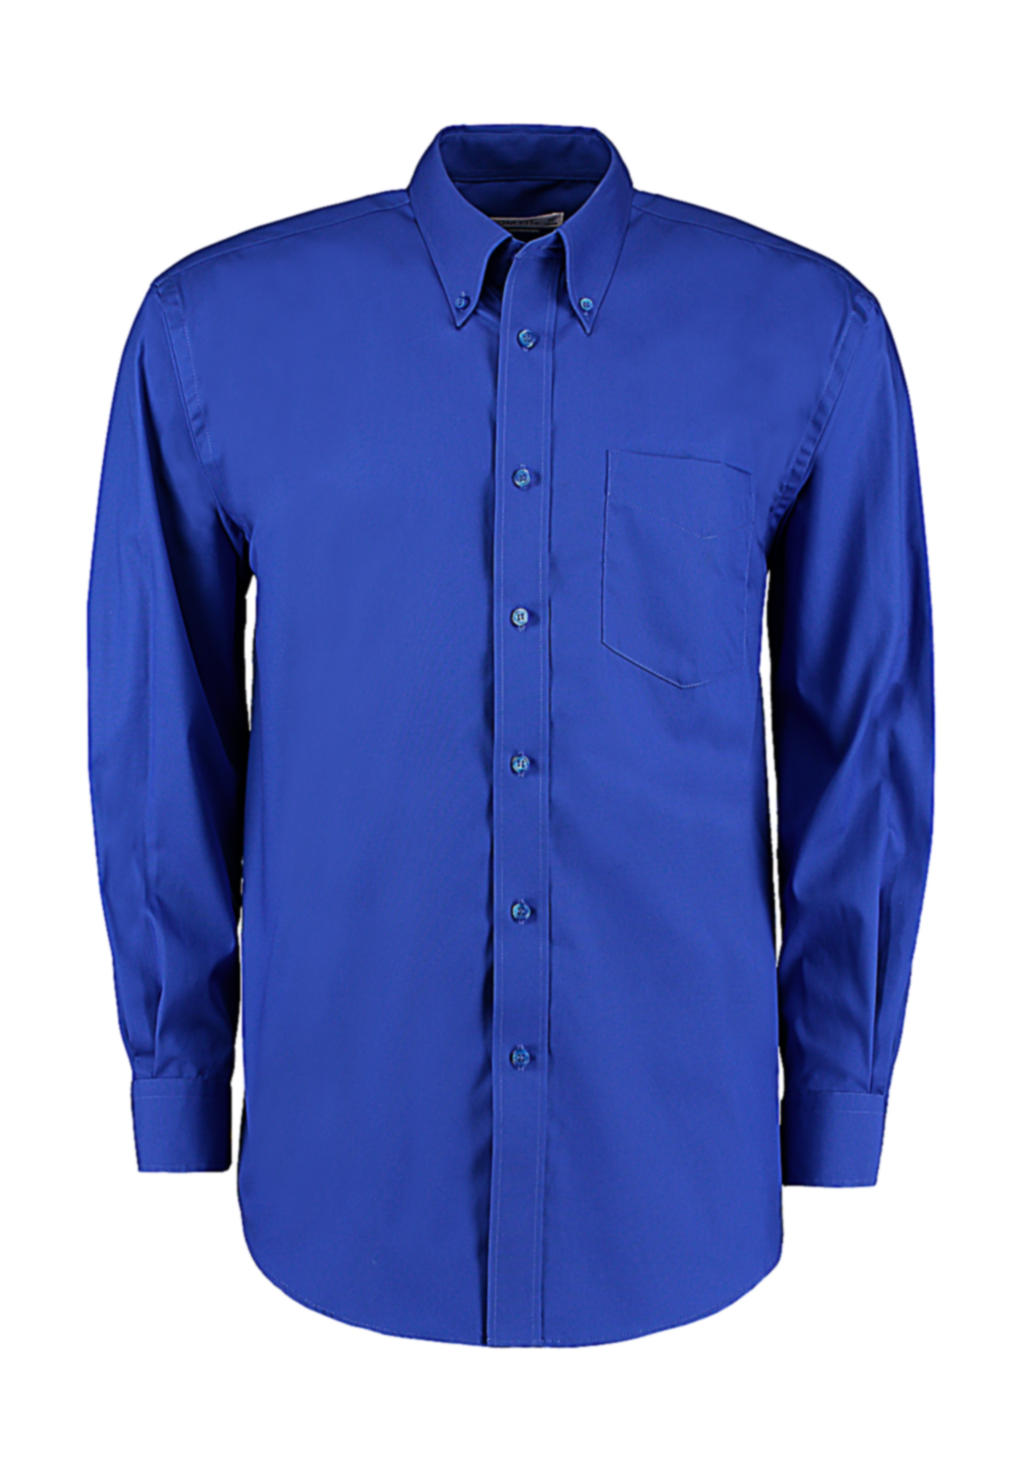  Classic Fit Premium Oxford Shirt in Farbe Royal